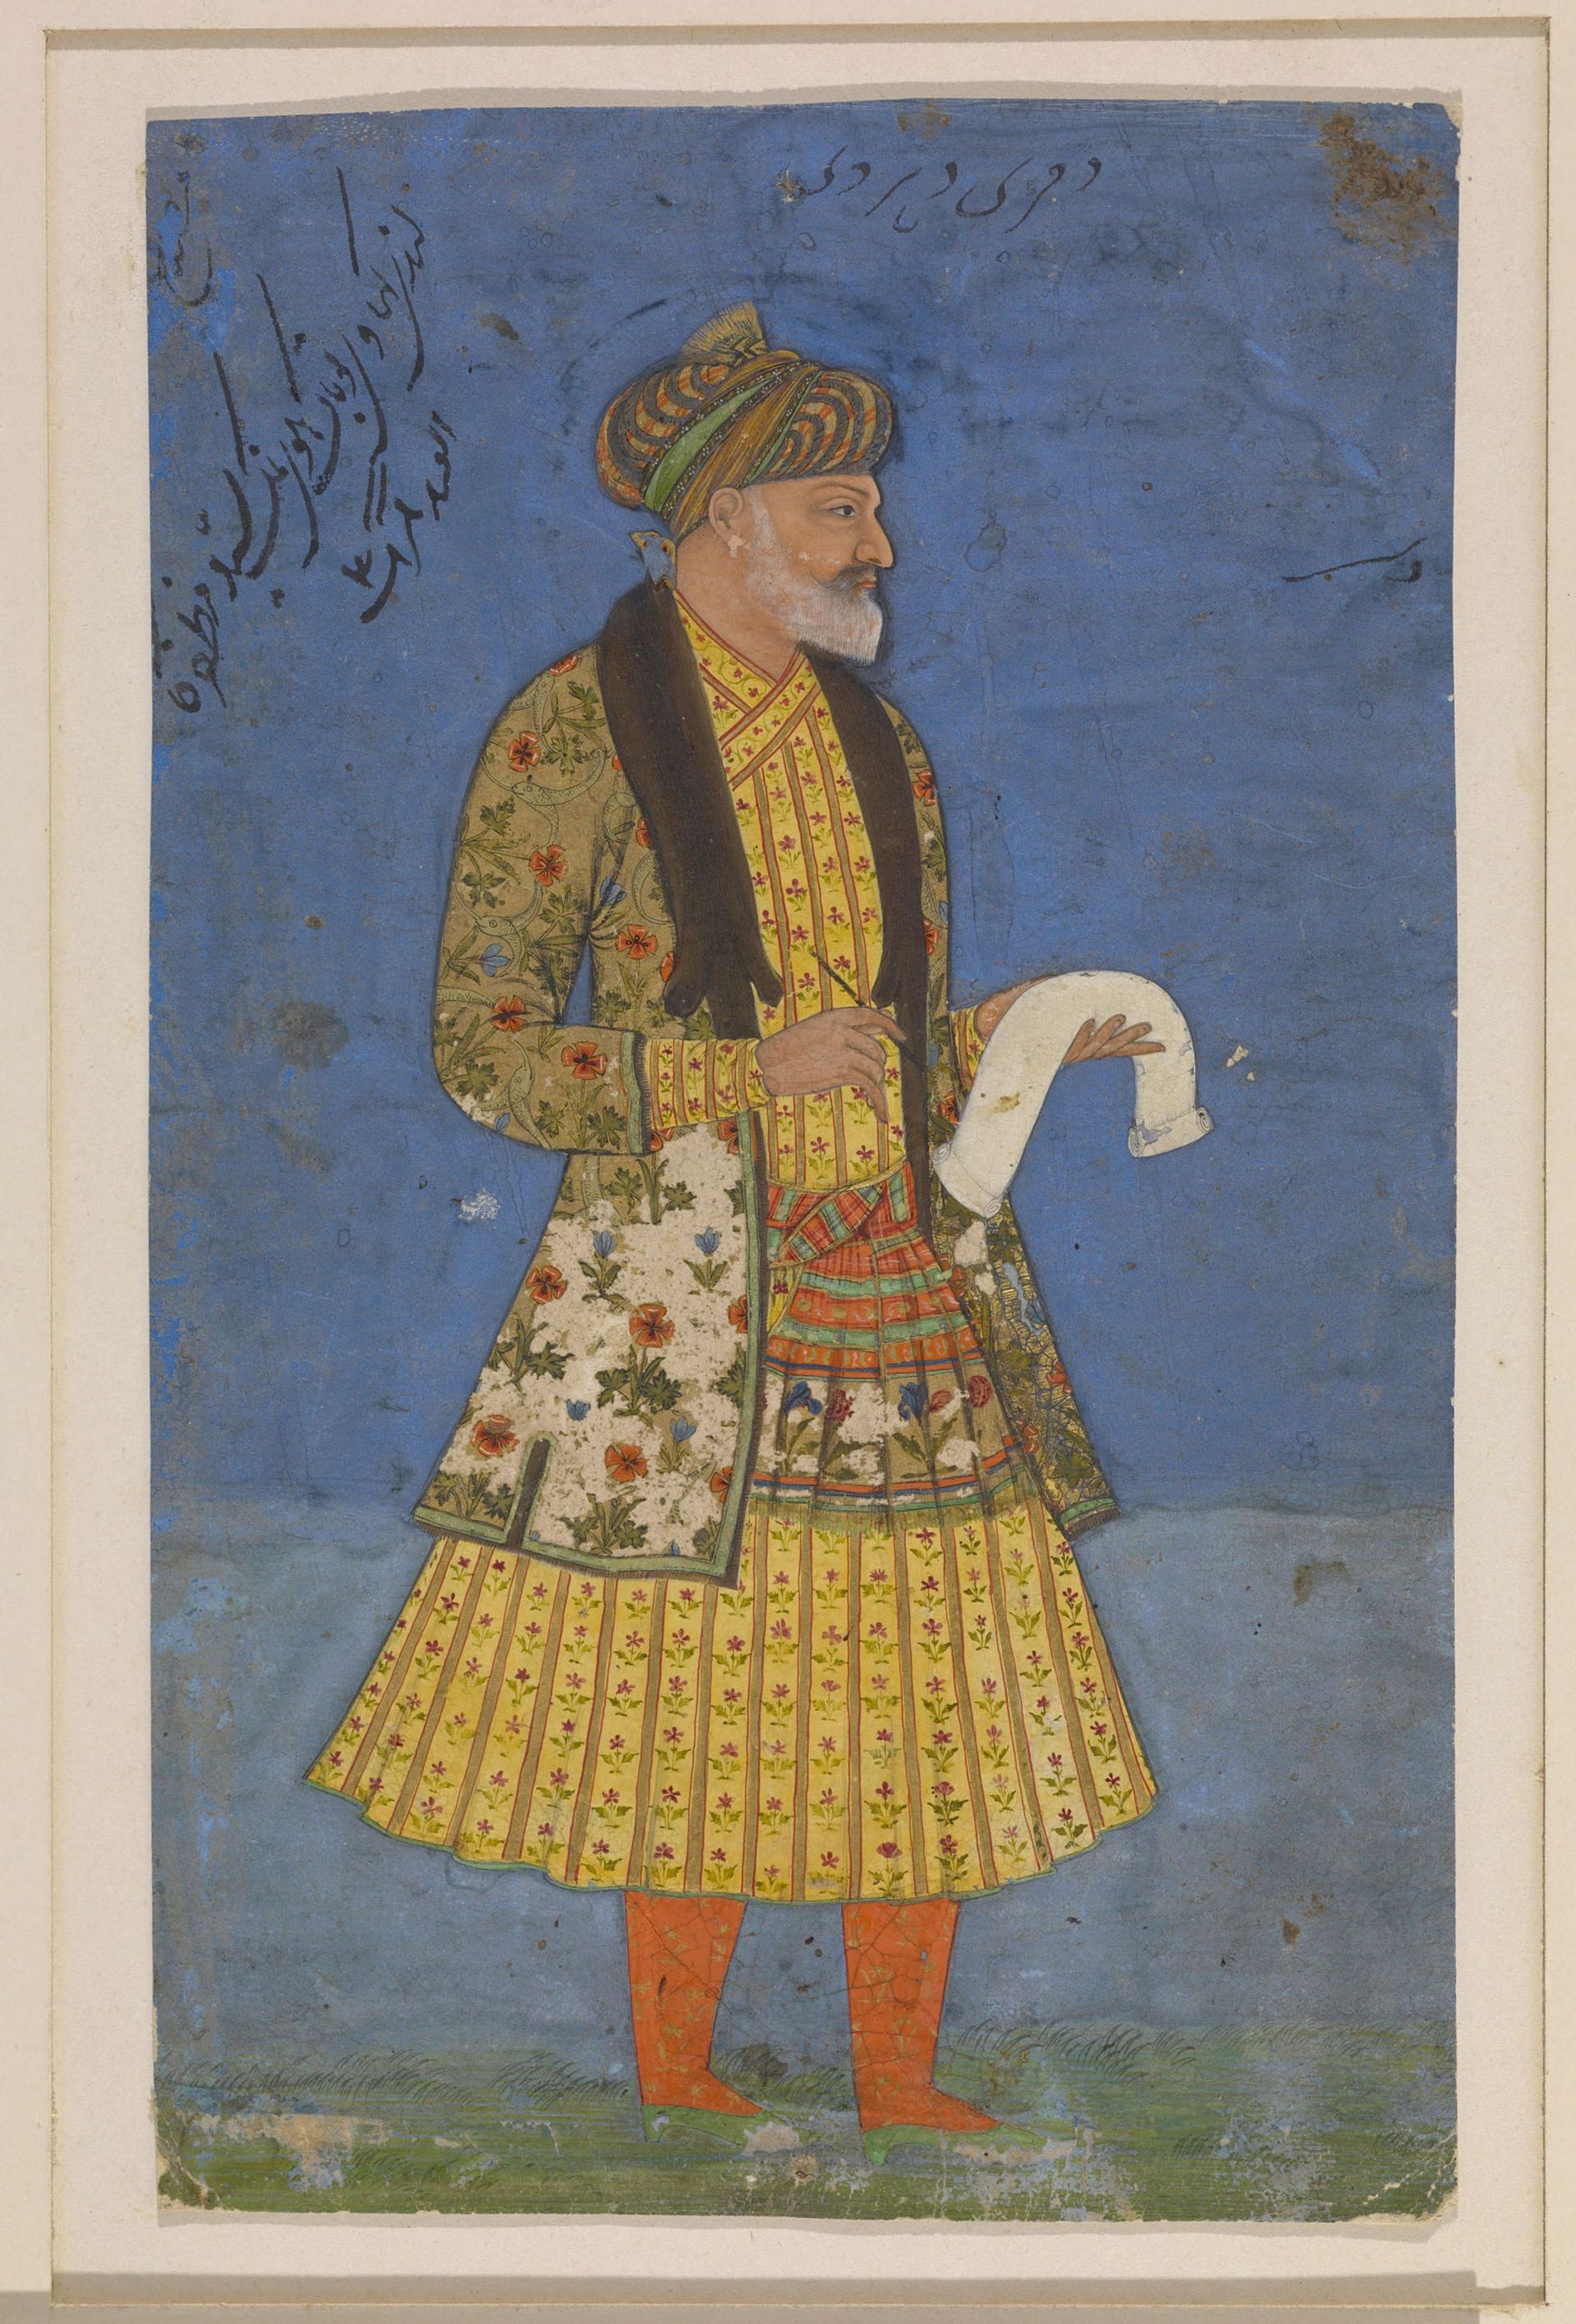 Man with a Flowered Coat, 18th century, India, watercolour on paper Gift of Mr. Ambrose Cramer